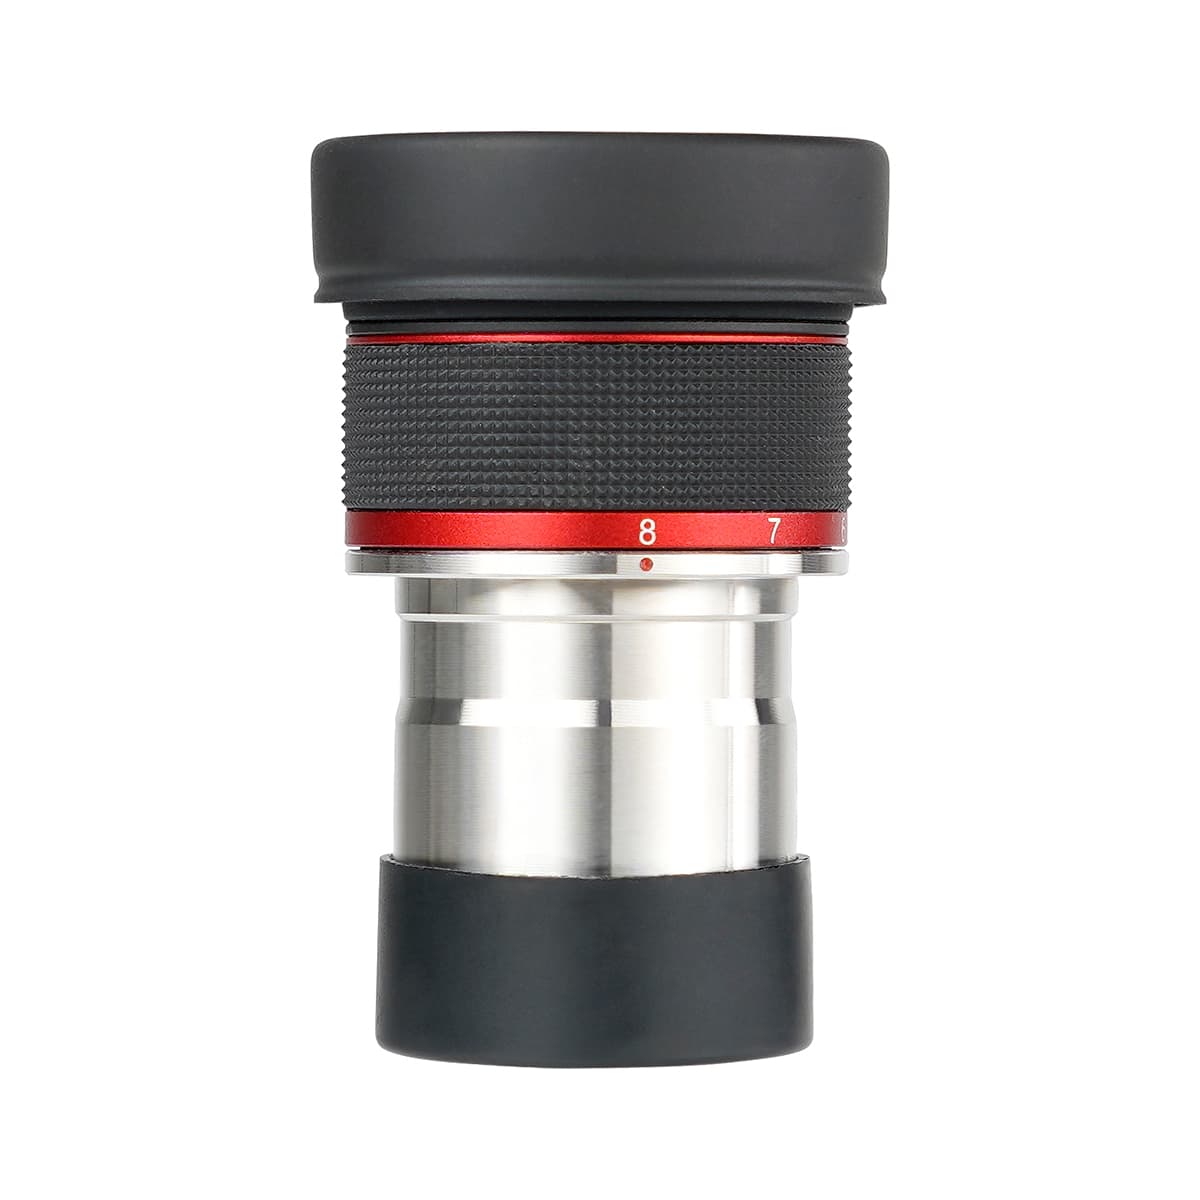 SV215 1.25" 3mm-8mm Planetary Zooms Eyepiece